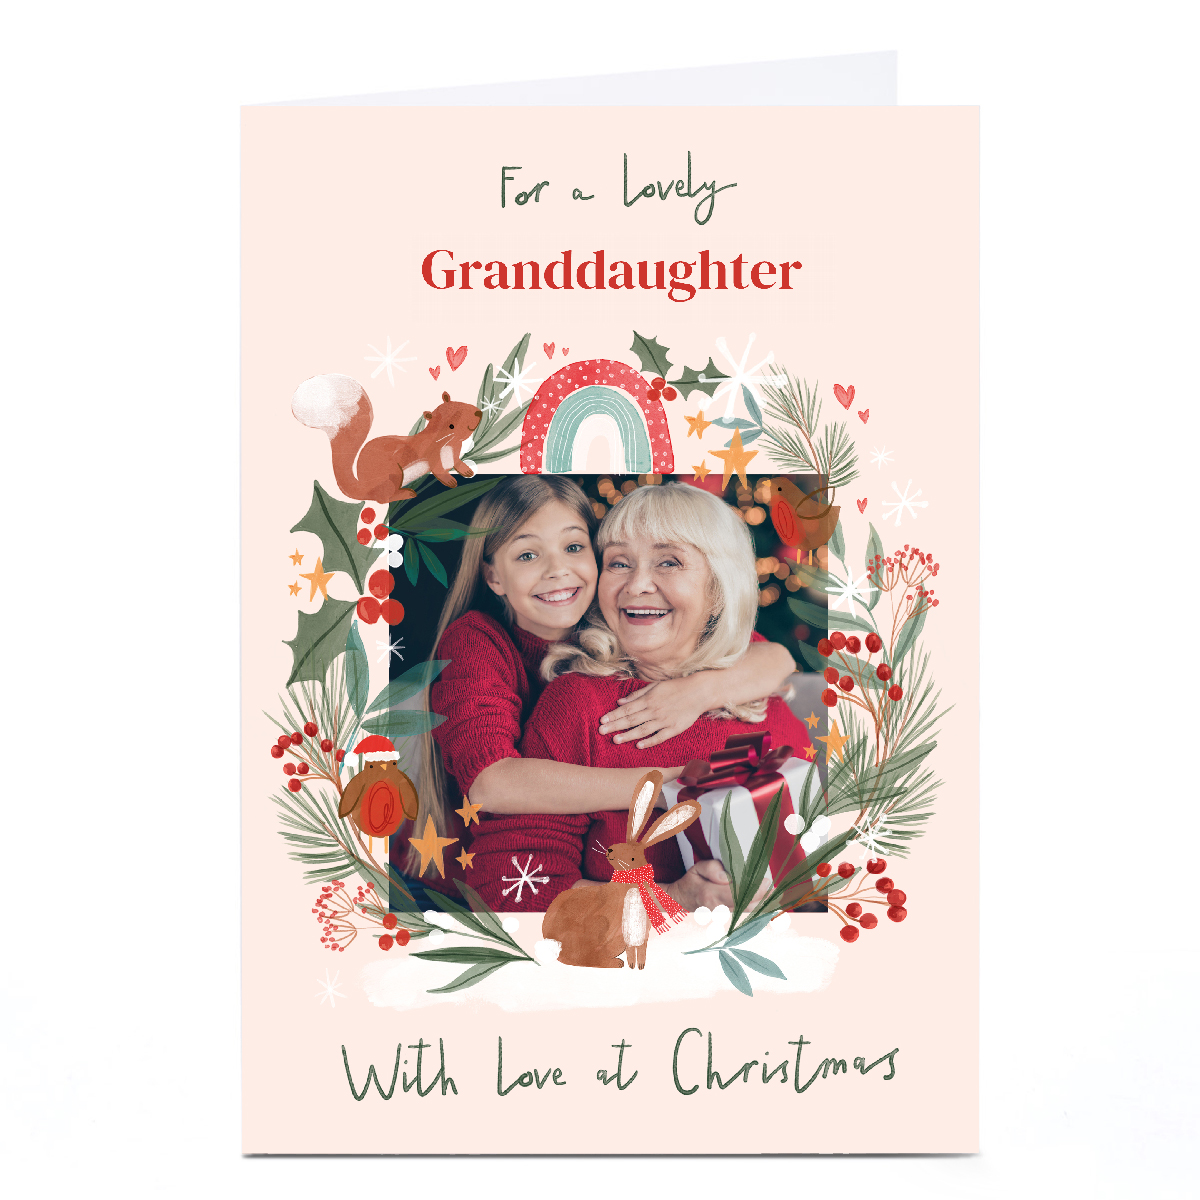 Photo Christmas Card - With Love at Christmas Festive Frame, Granddaughter